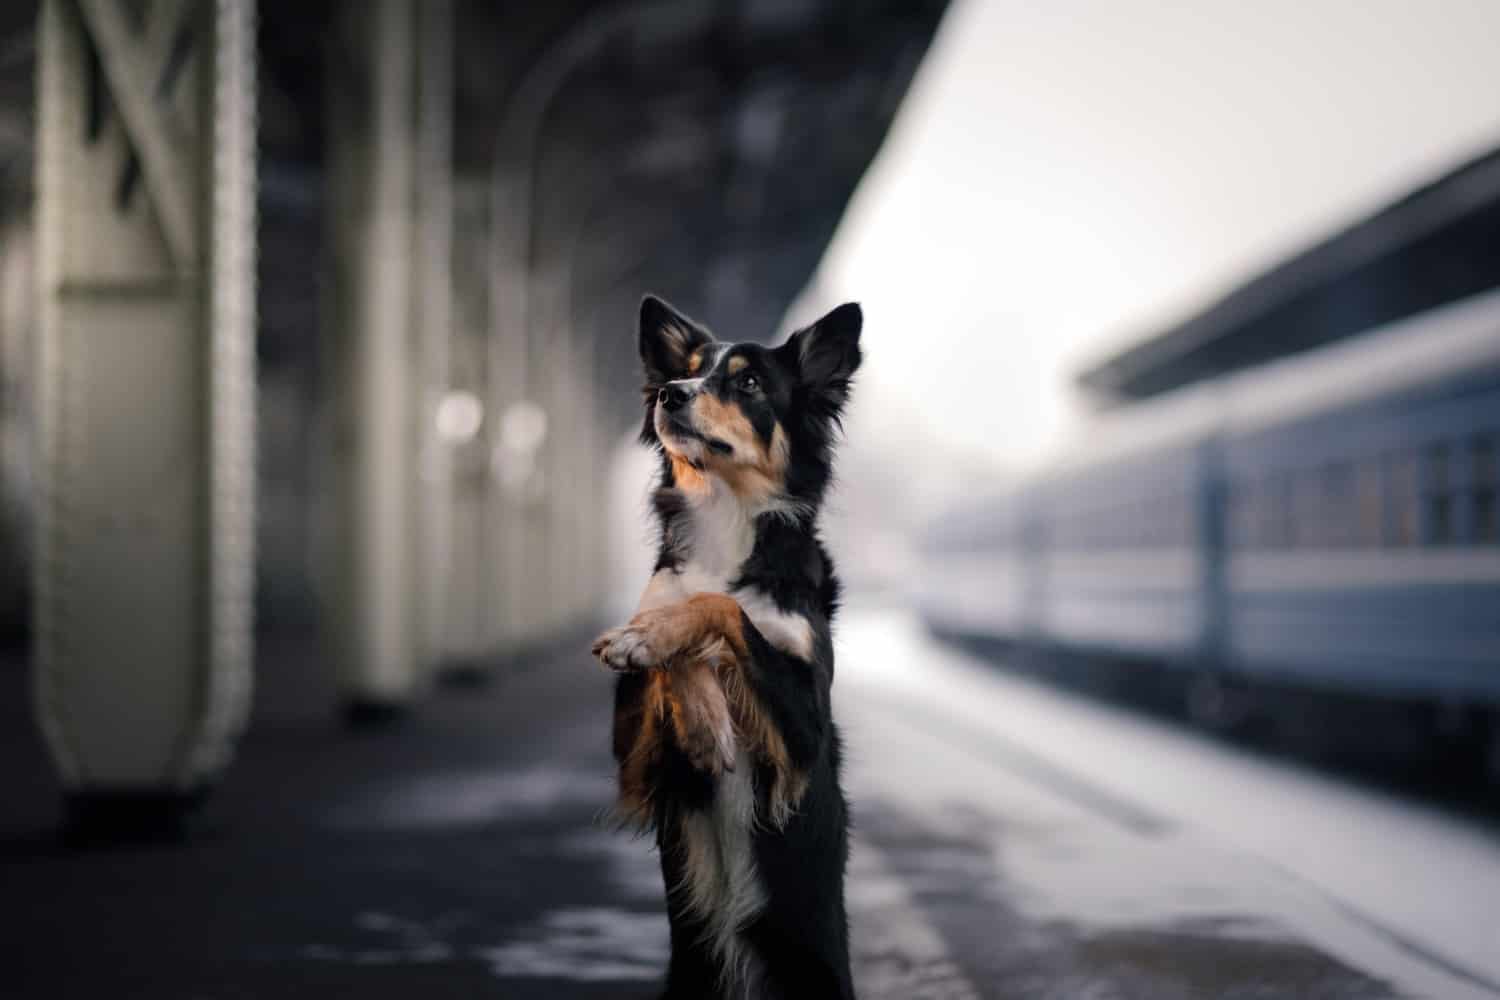 A dog in a train station waiting for a pet friendly train ride